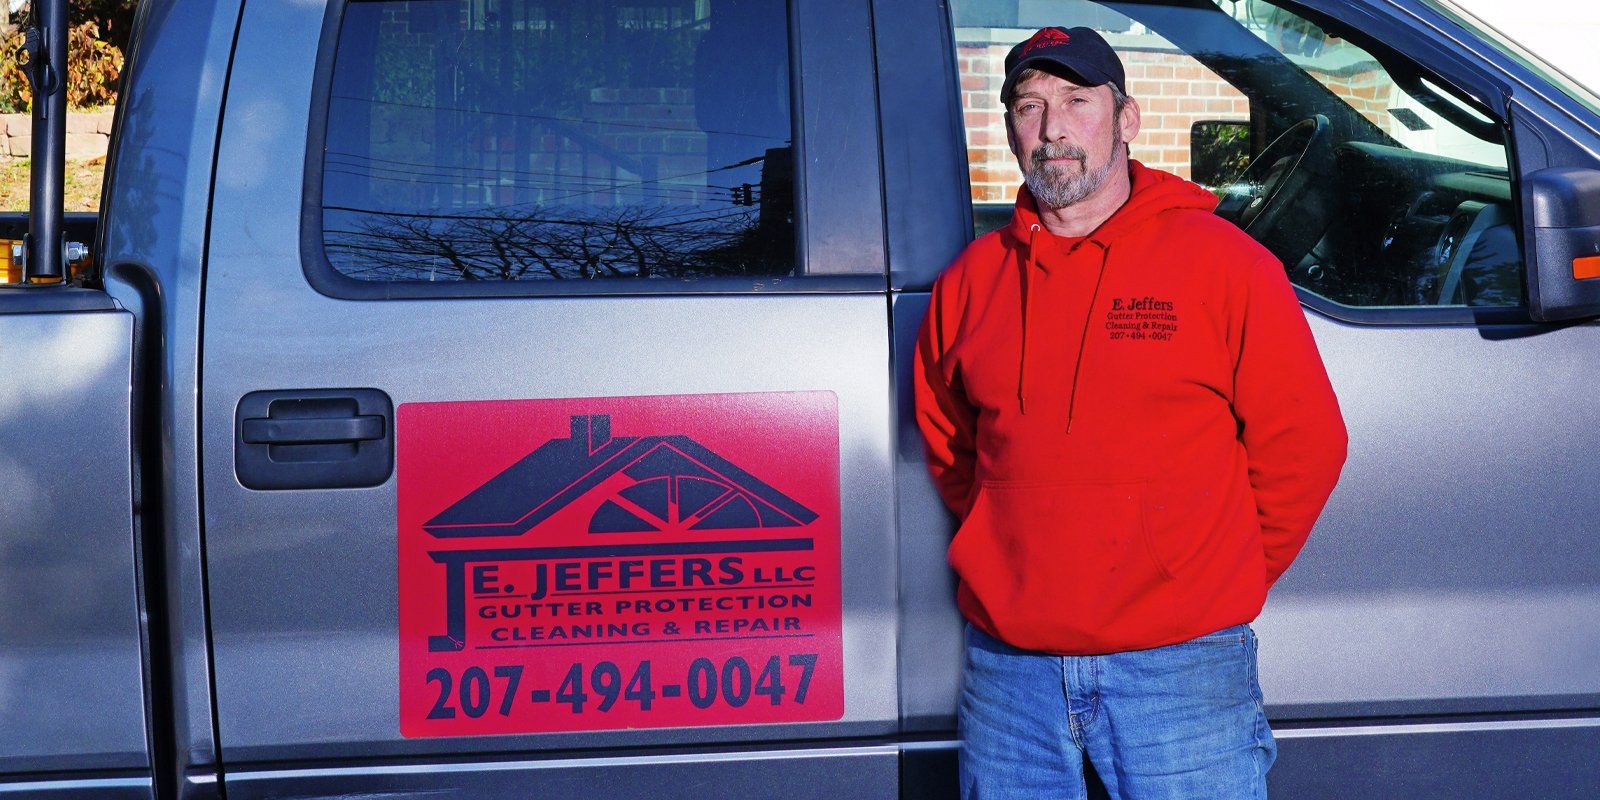 E Jeffers Gutter Protection, Cleaning, And Repair | Southern Maine | Keep It Local Maine